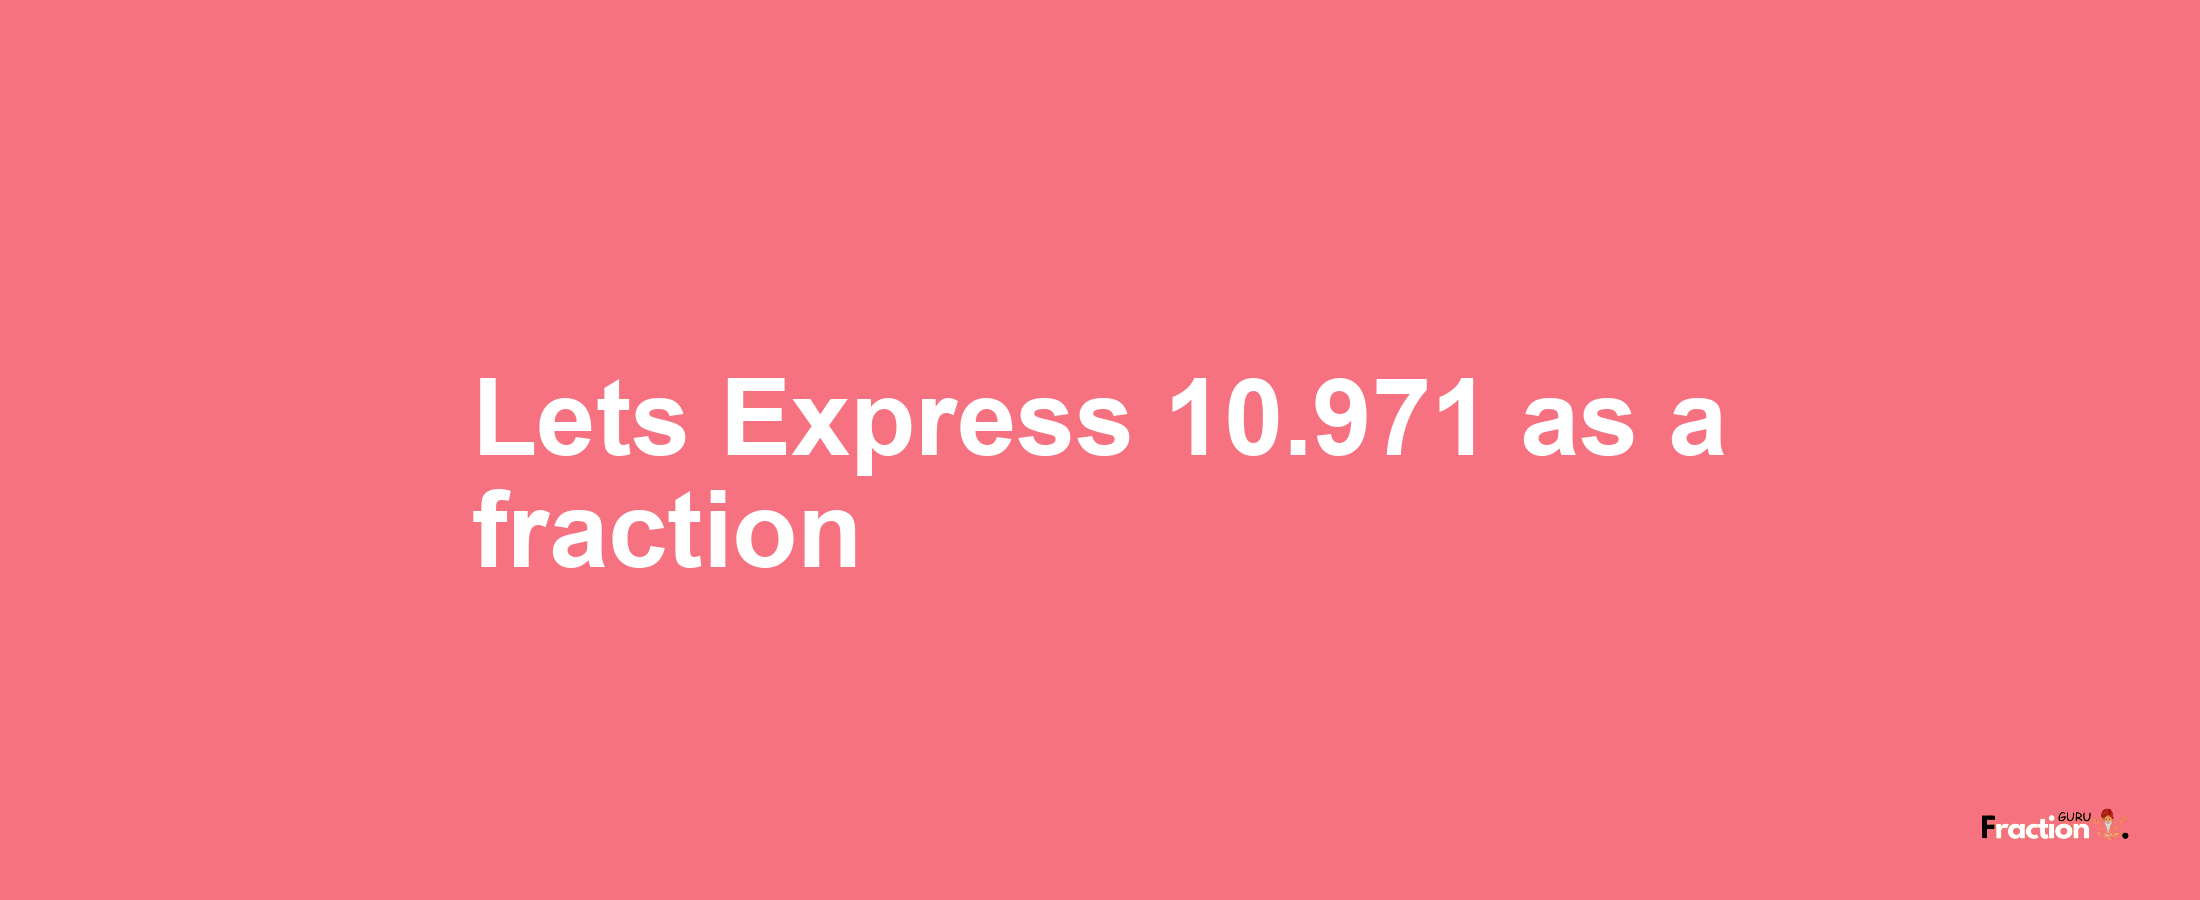 Lets Express 10.971 as afraction